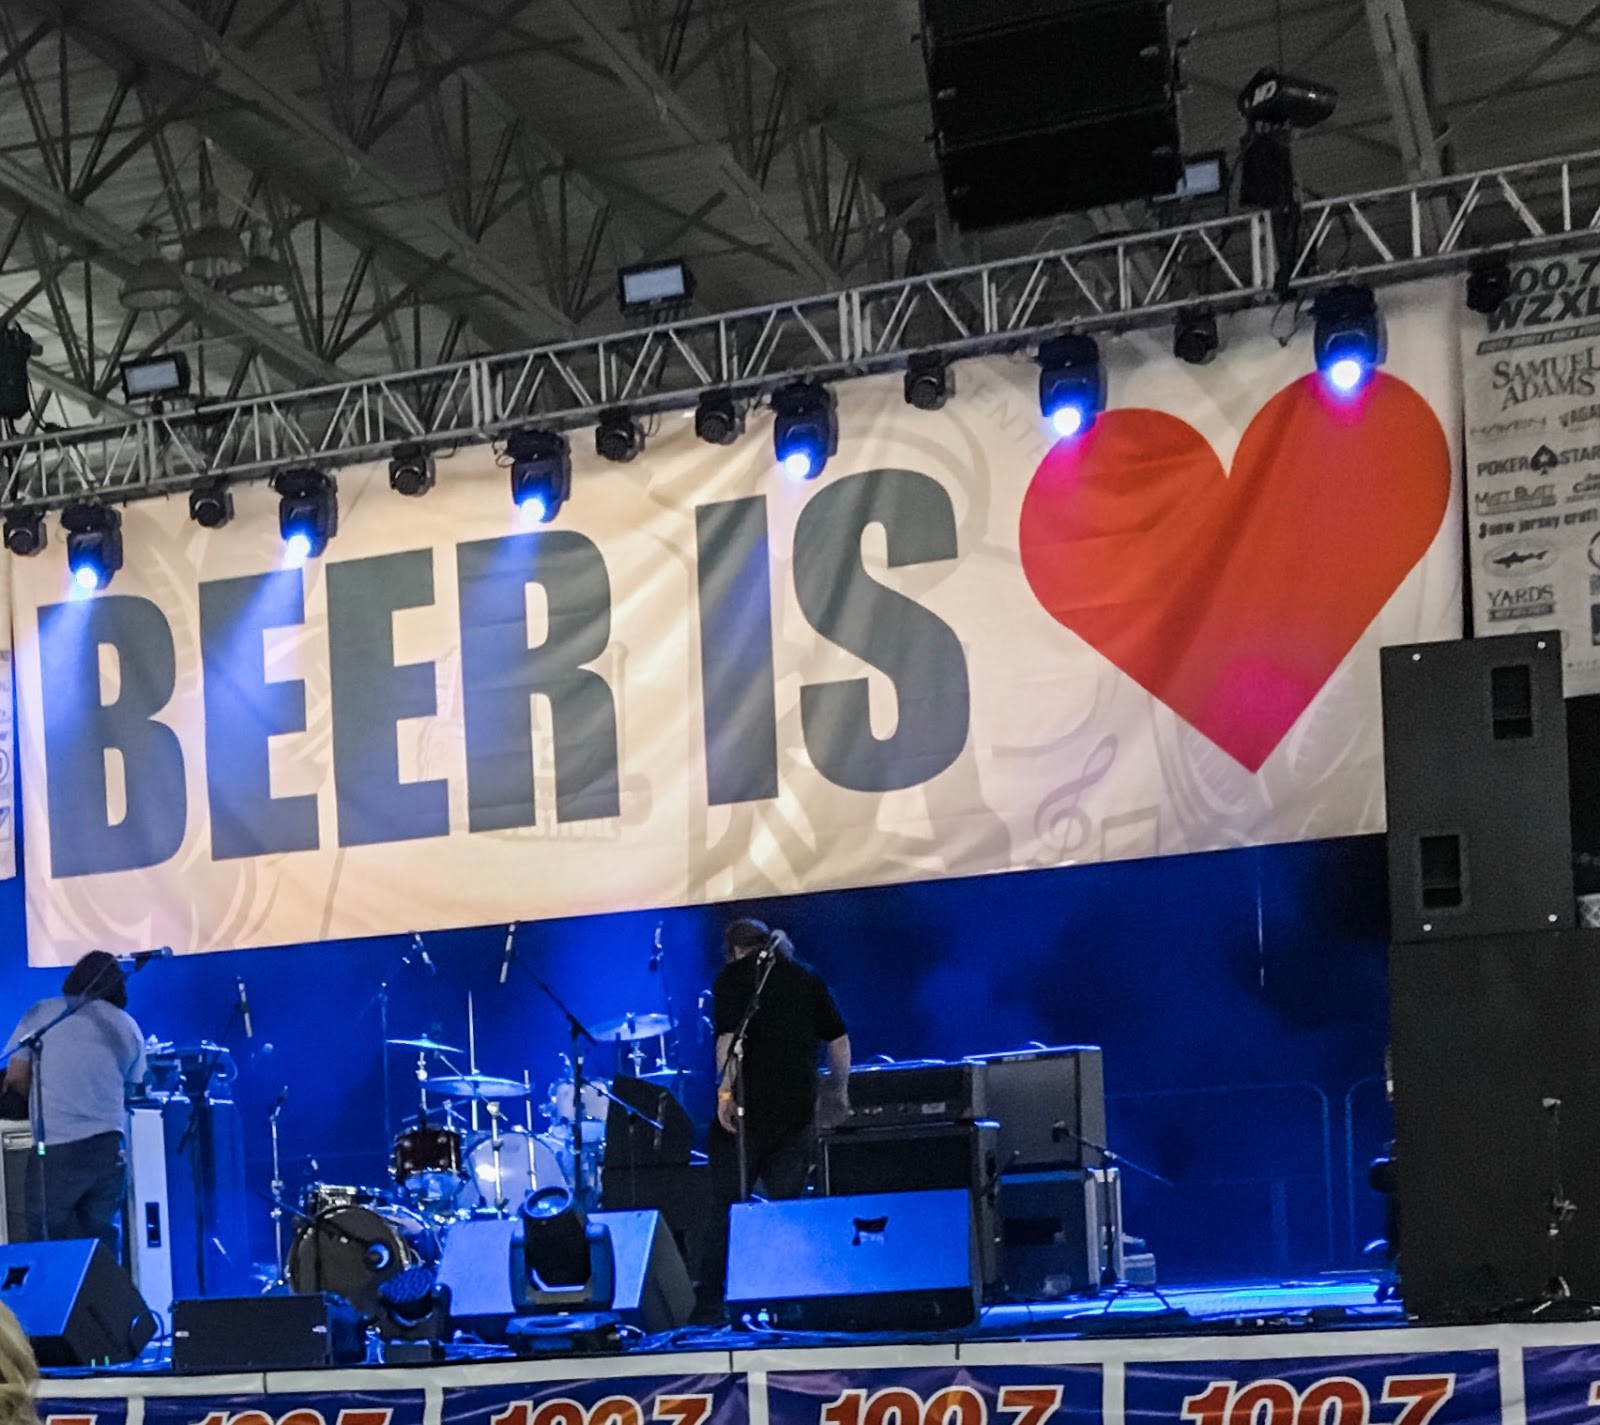 Missing the Atlantic City Beer and Music Festival Hoppy Beer Chic